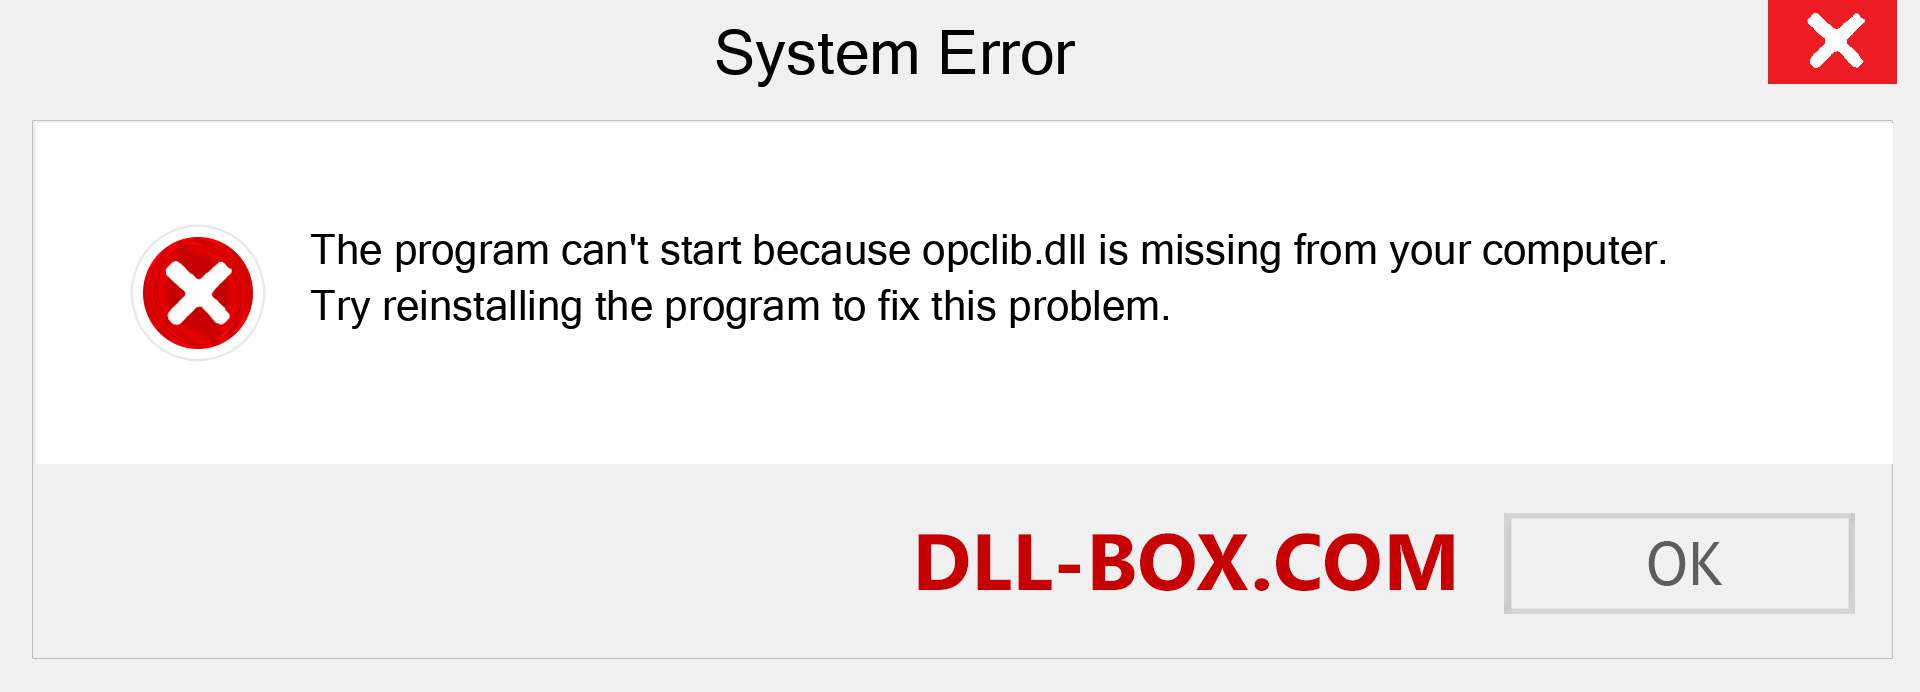  opclib.dll file is missing?. Download for Windows 7, 8, 10 - Fix  opclib dll Missing Error on Windows, photos, images